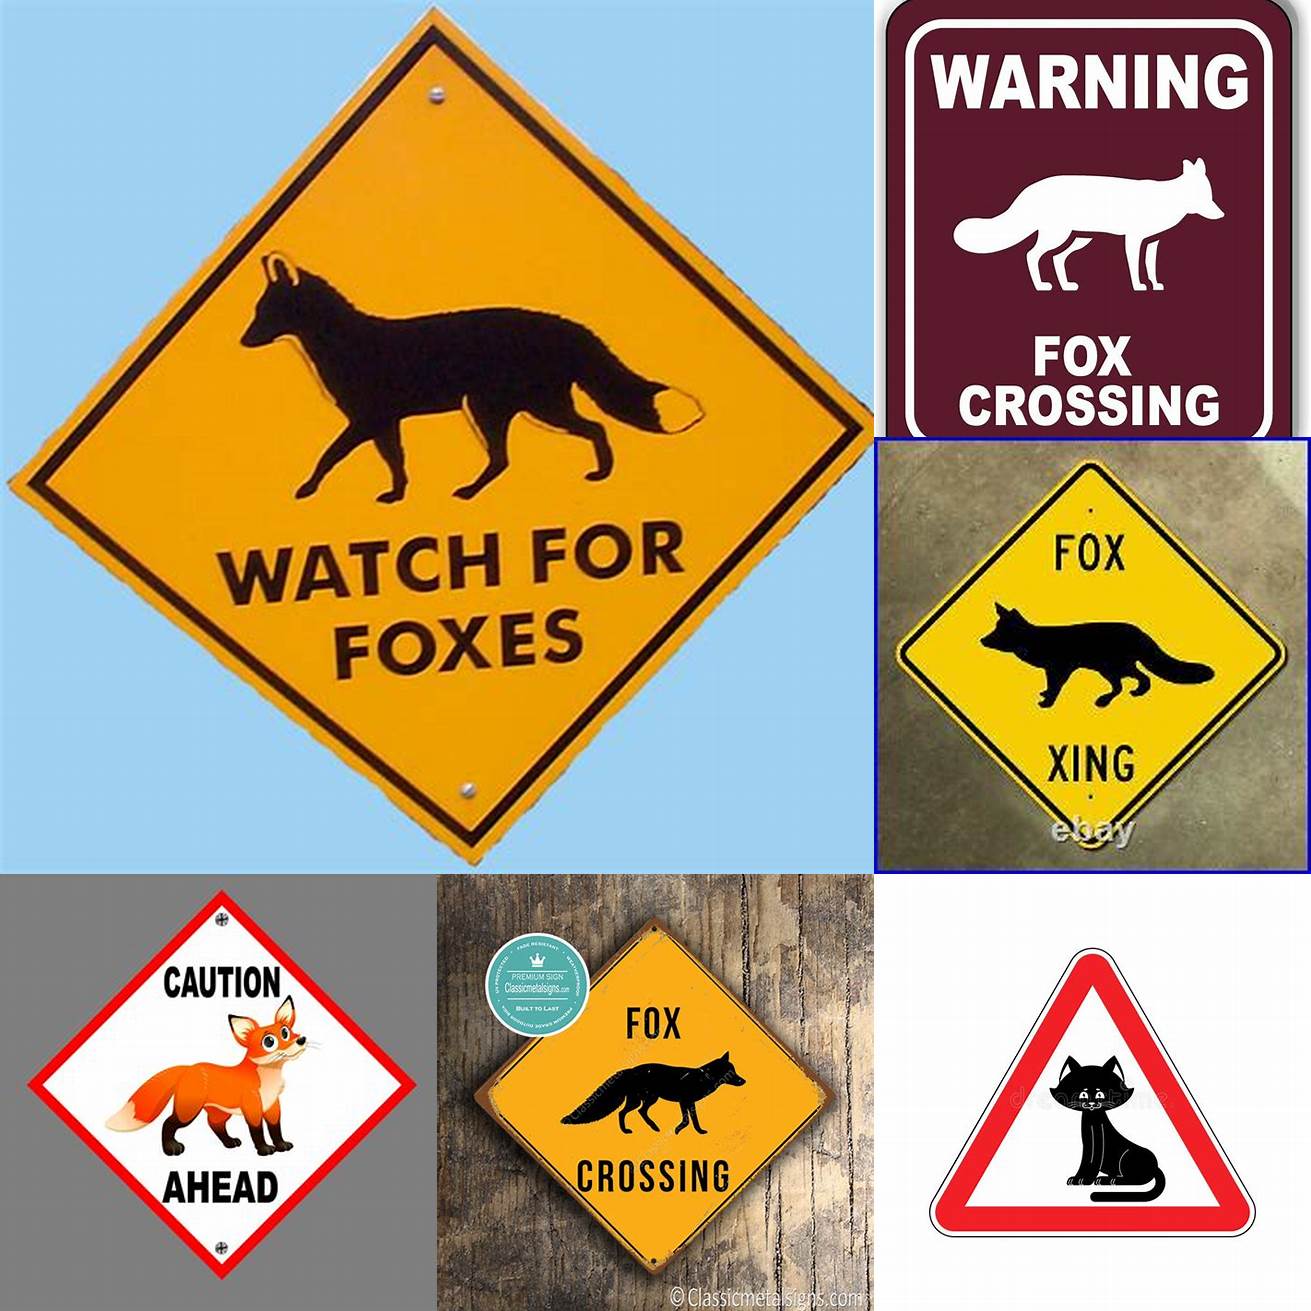 A picture of a fox warning sign